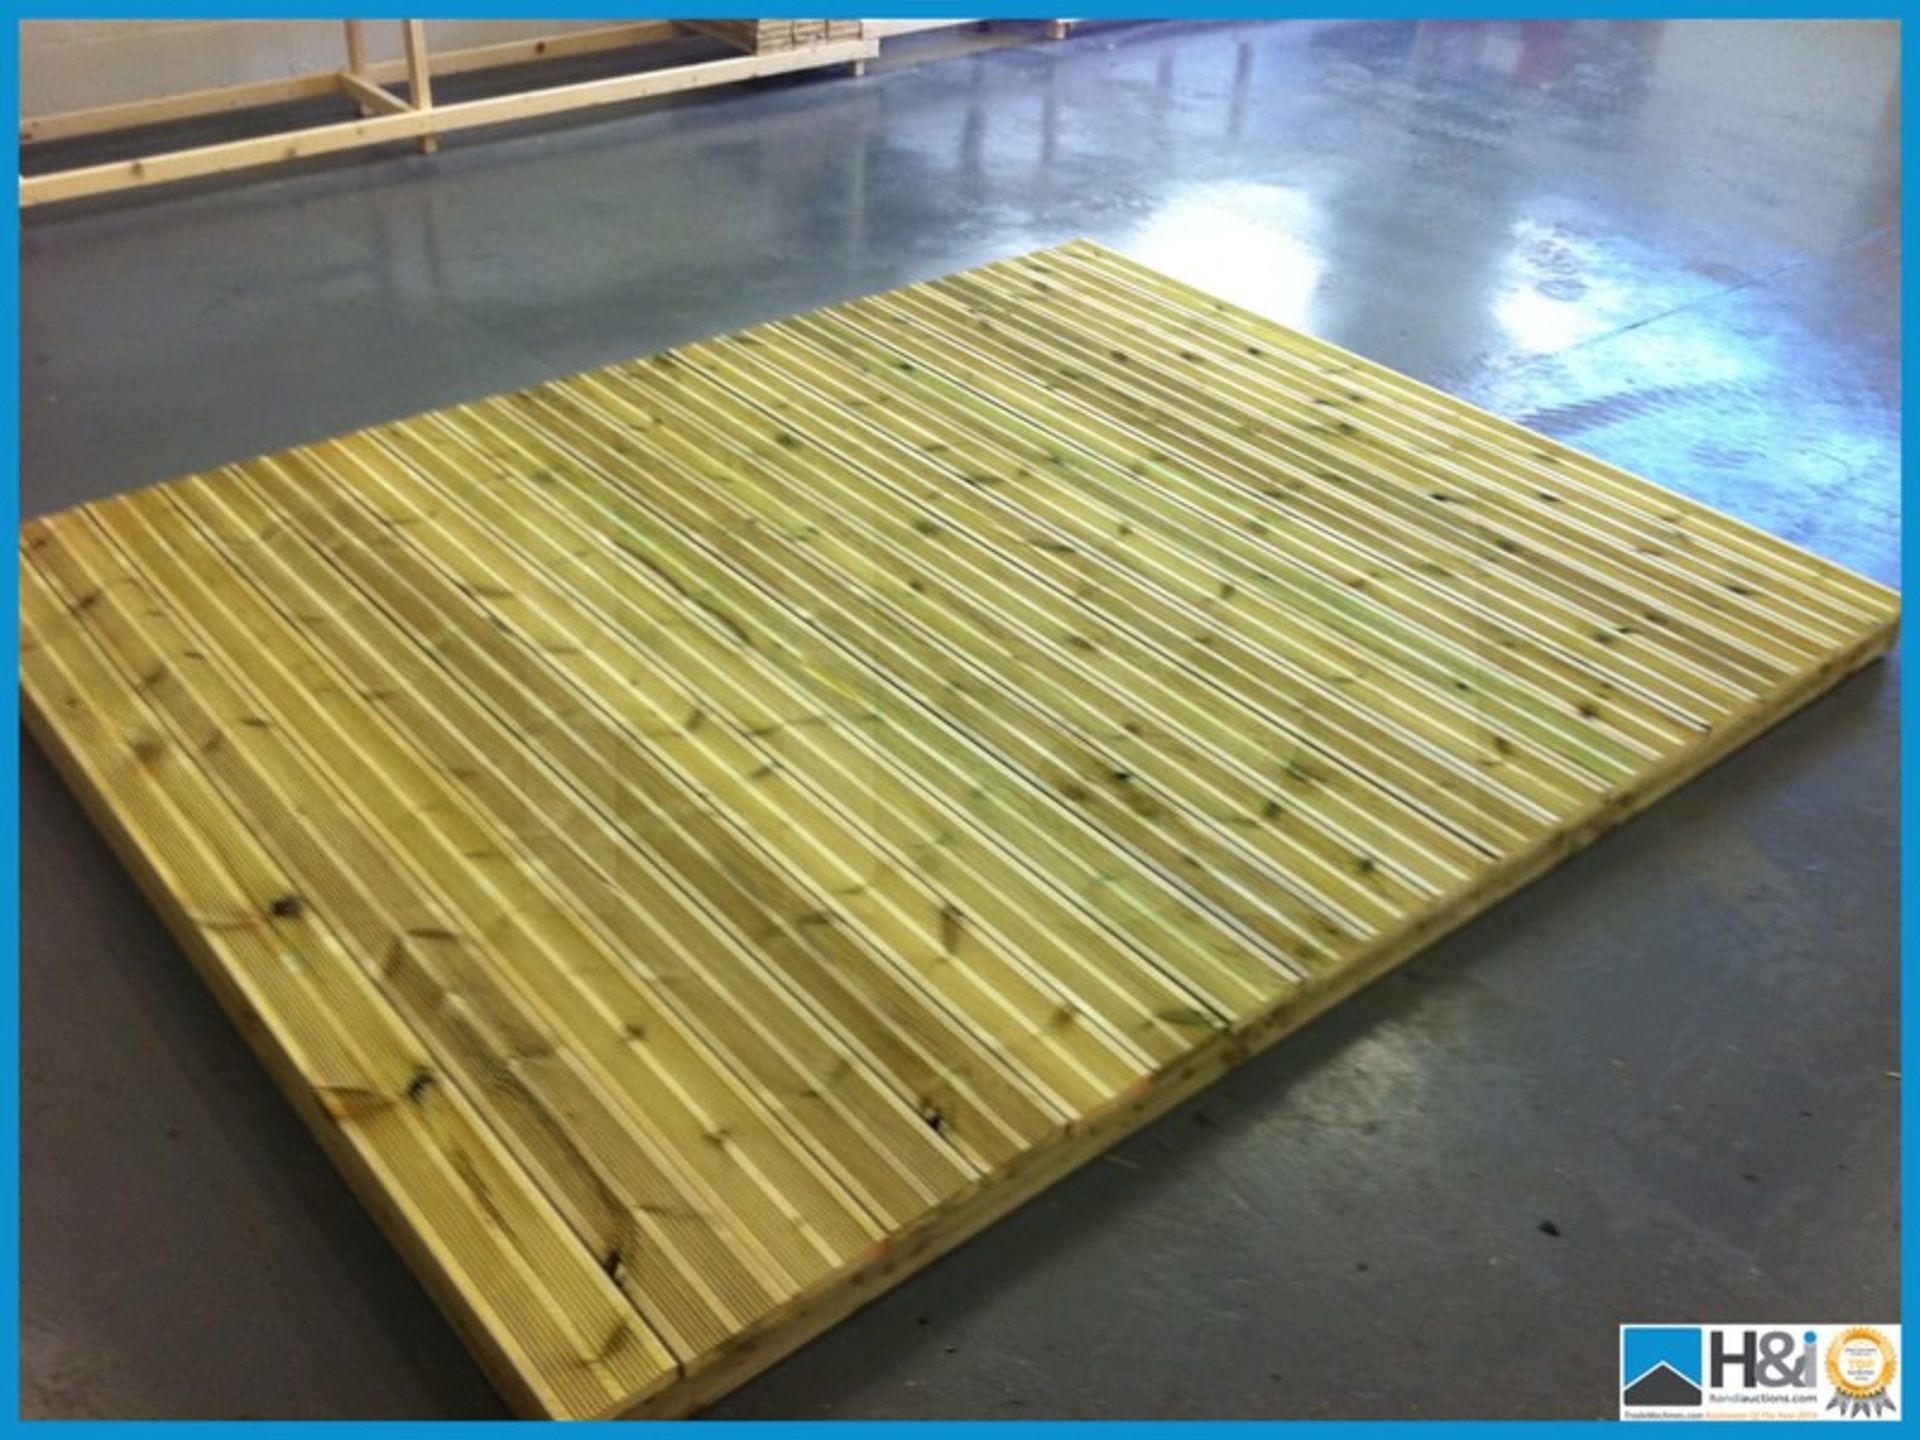 Tanalised 2.4 x 2.4 Heavy Duty Decking Kit. All 32x125 decking cut to length with side fascia's - Image 5 of 12